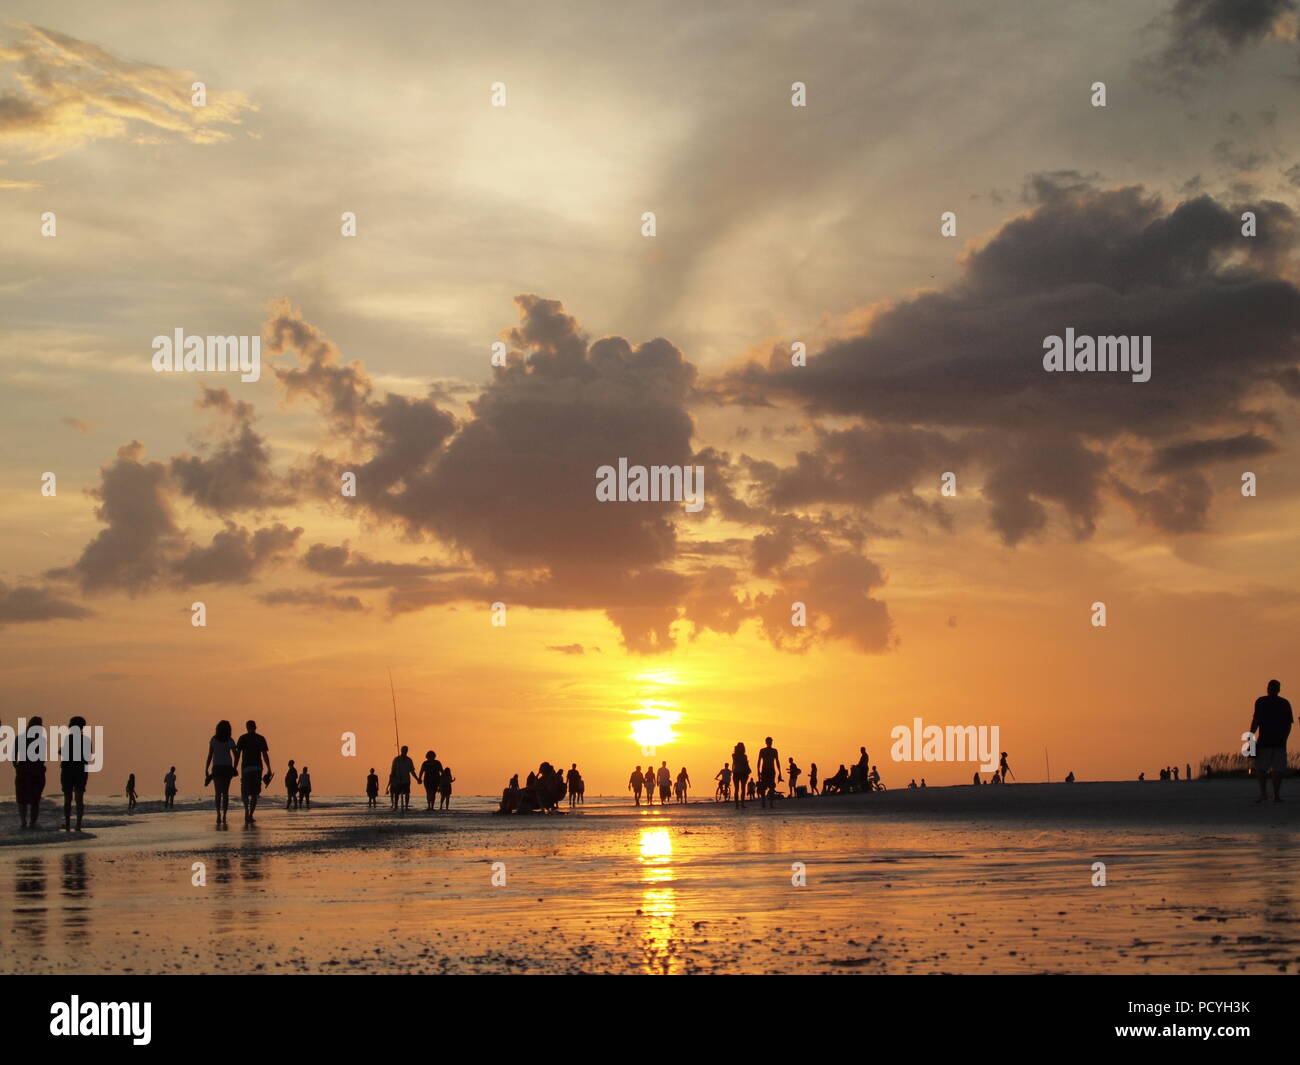 people walking on beach at sunset on siesta key beach. low angle view with light effect silhouettes of people enjoying nature Stock Photo